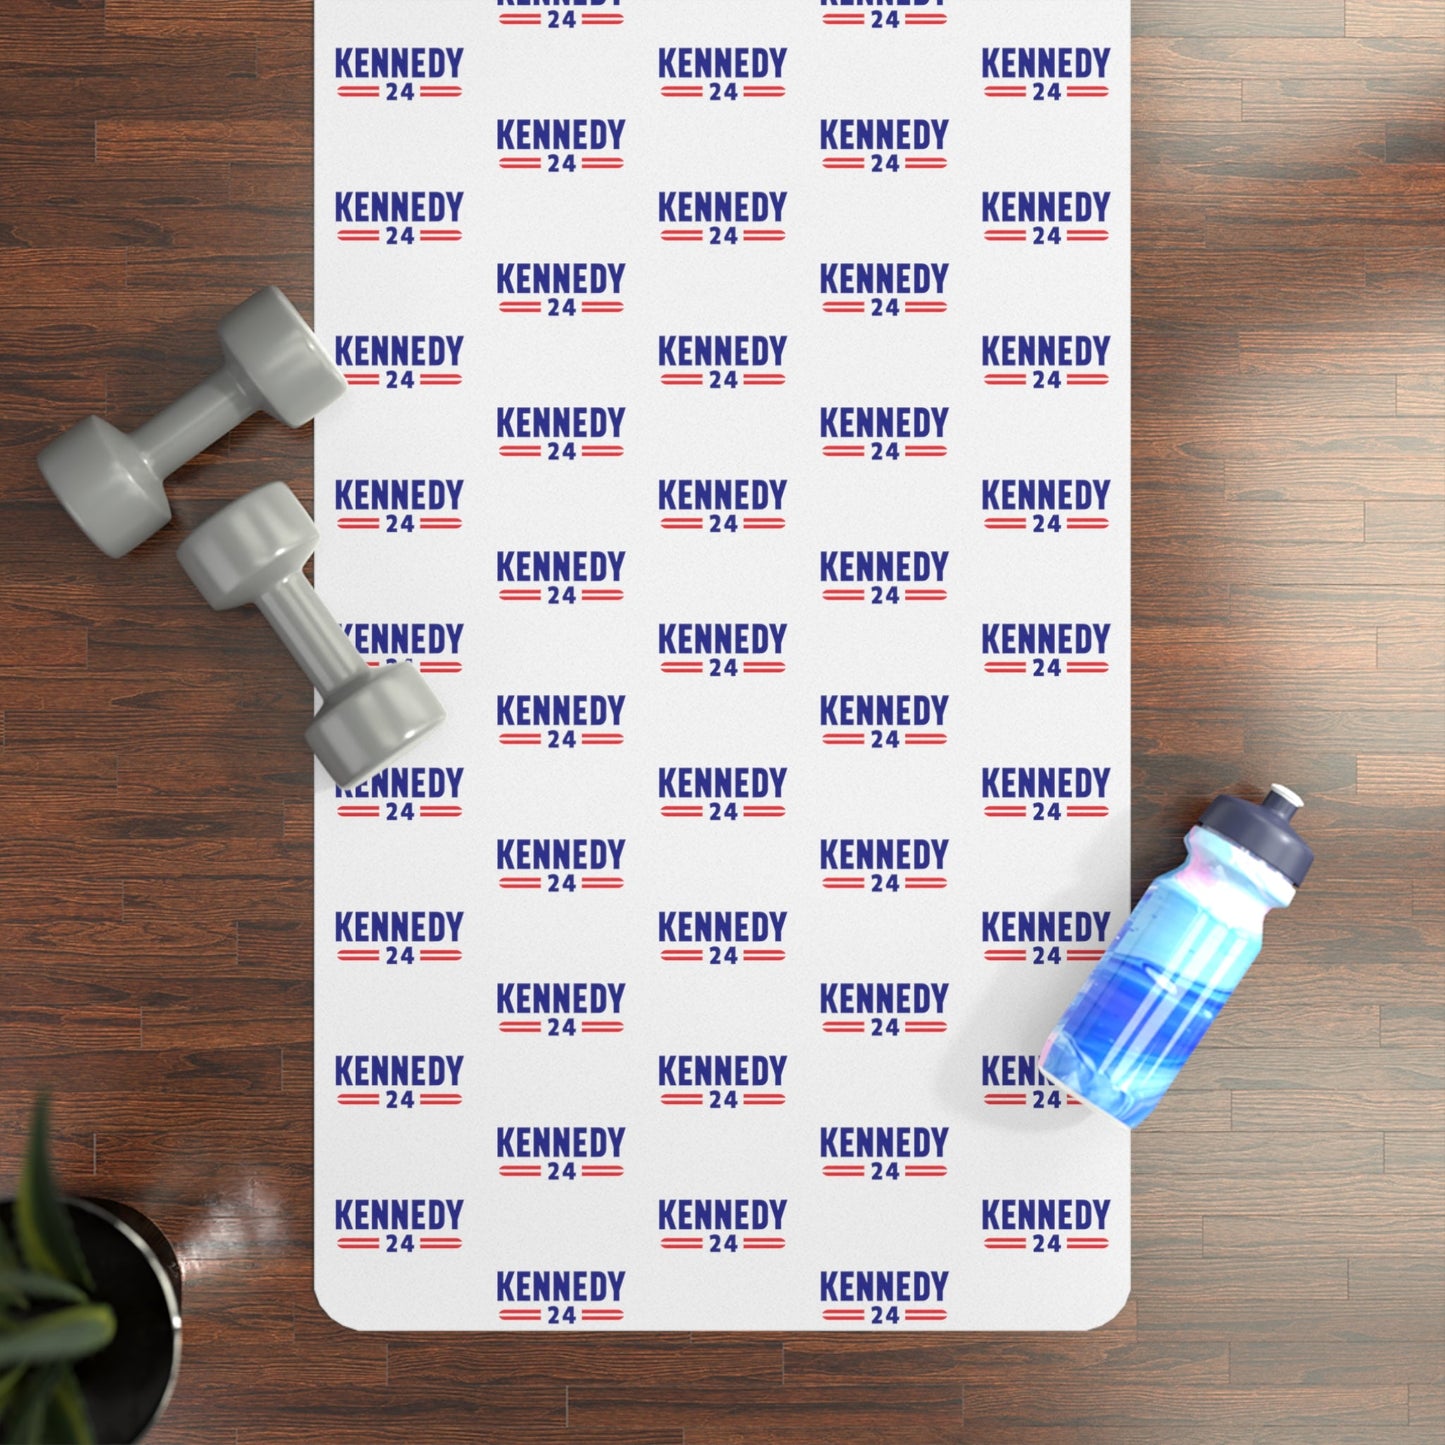 Kennedy Classic Yoga Mat - TEAM KENNEDY. All rights reserved